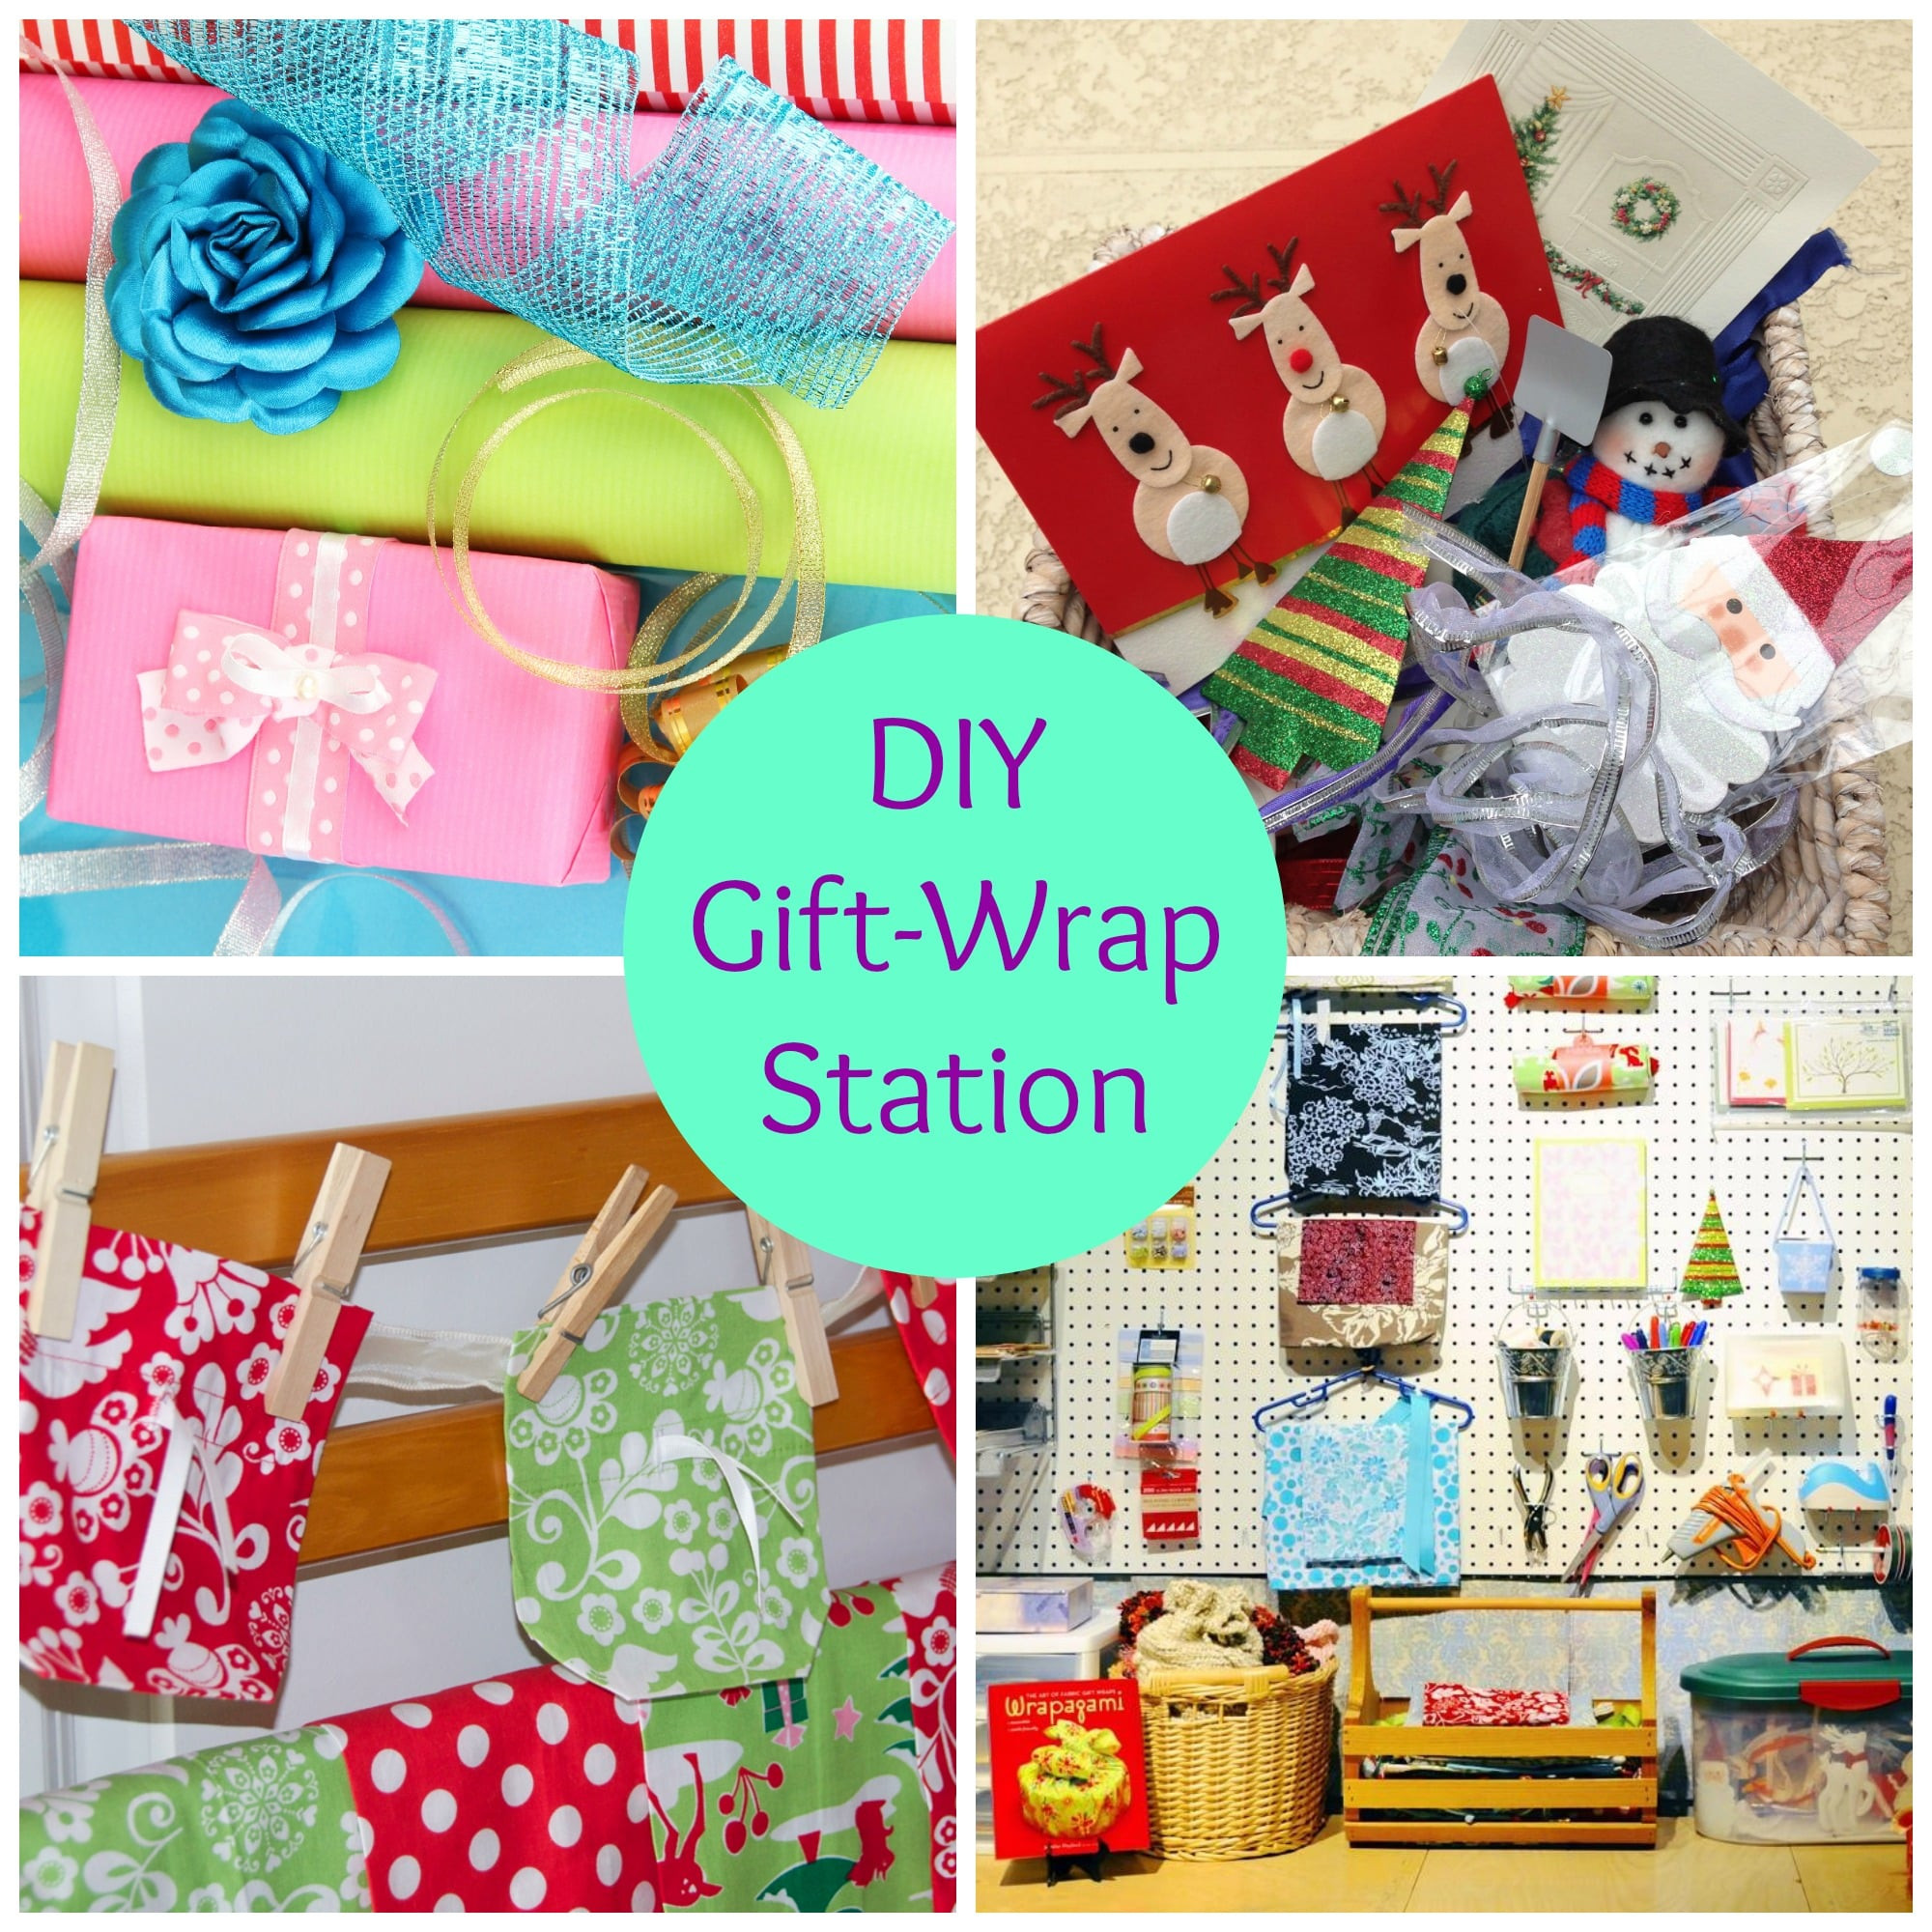 DIY Gift Wrap Station
 DIY Gift Wrapping Station